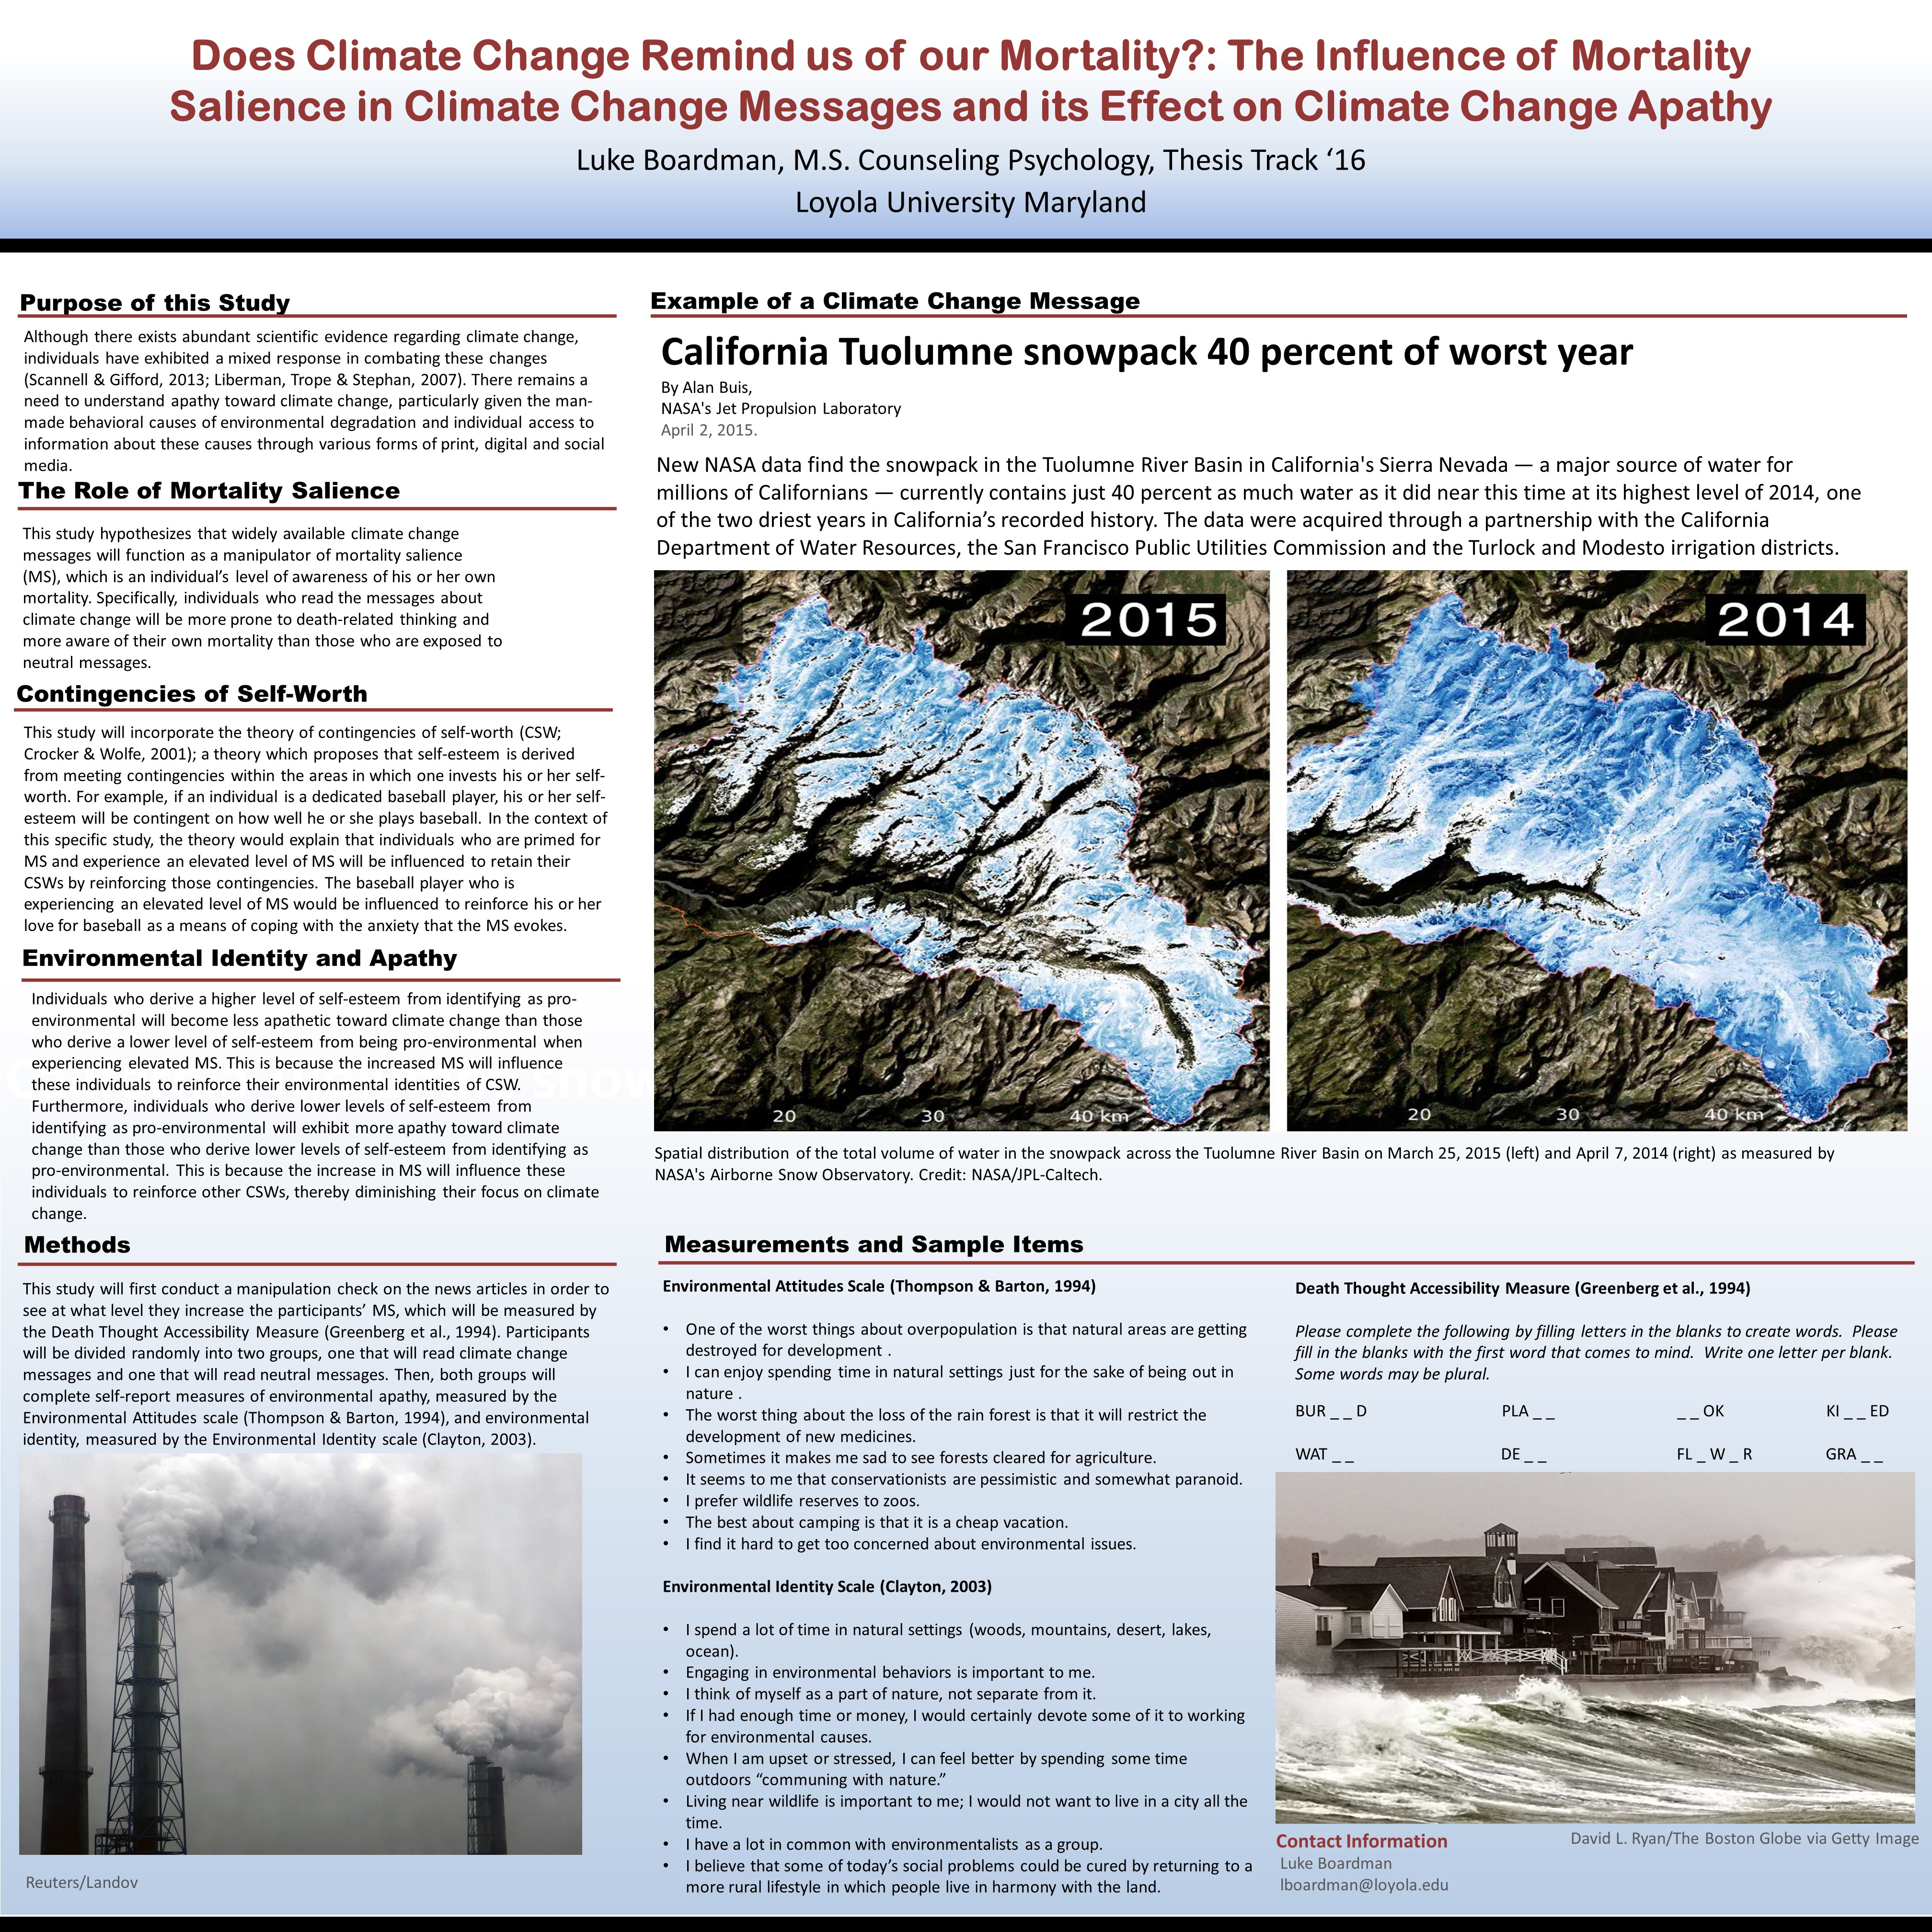 poster image: Does Climate Change Remind us of our Mortality?: The Influence of Mortality Salience in Climate Change Messages and its Effect on Climate Change Apathy